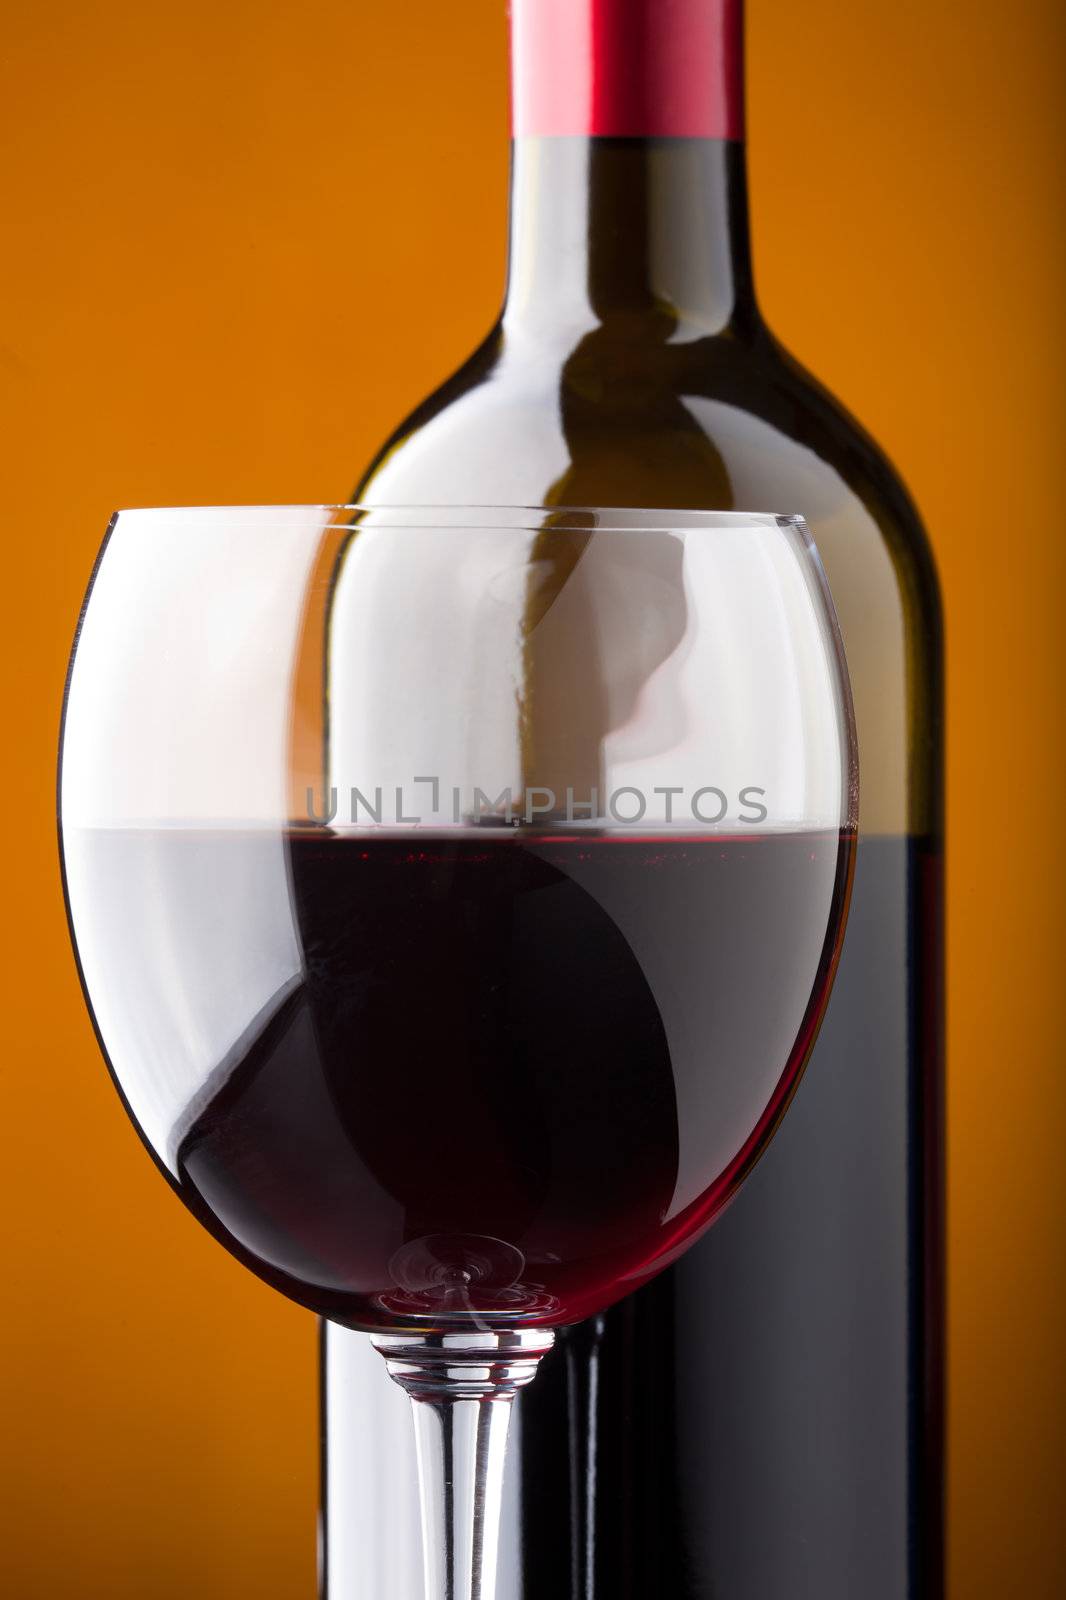 A bottle of red wine and a wine glass closeup by Antartis